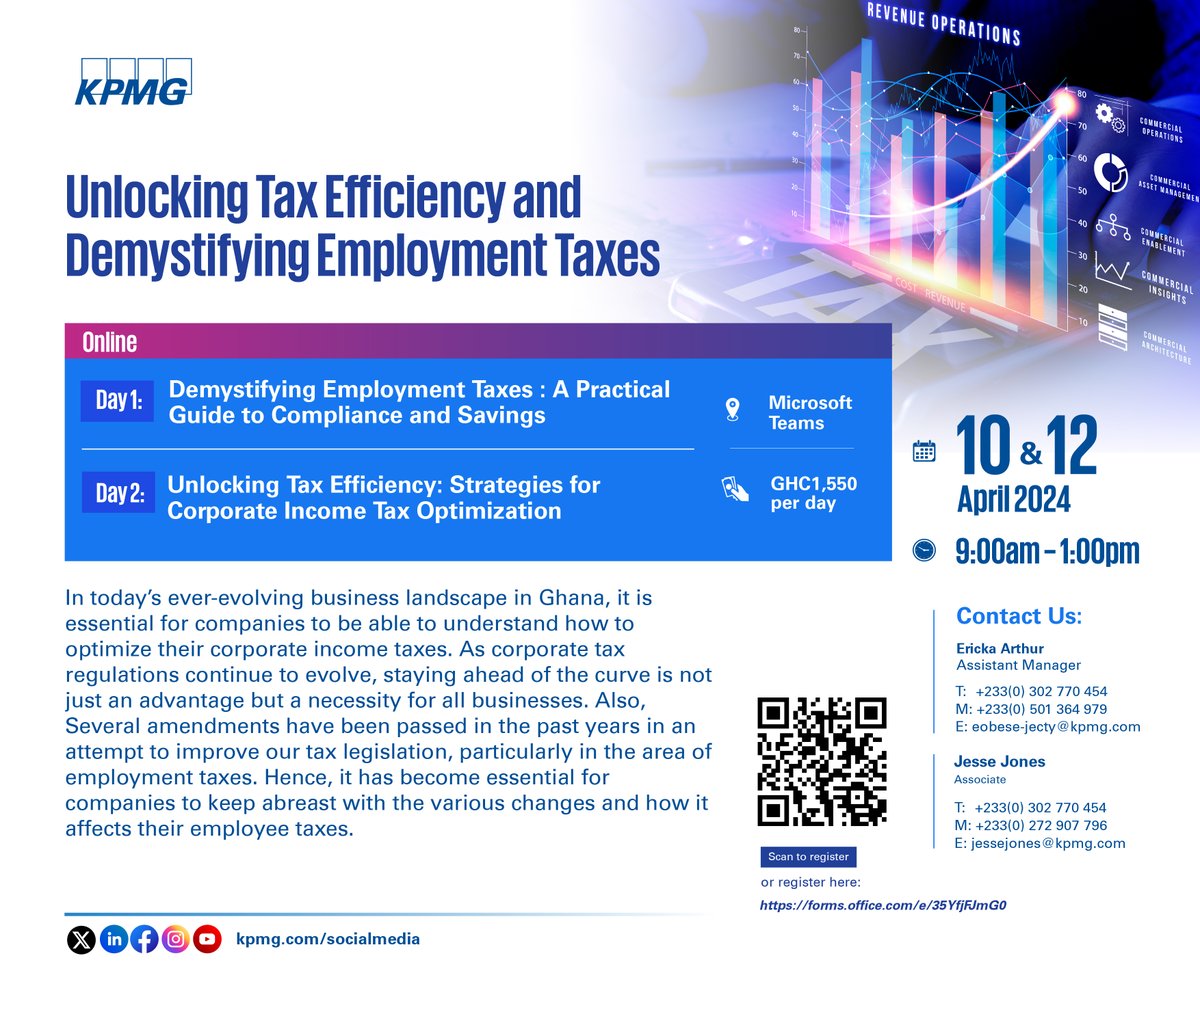 Maximize tax efficiency with KPMG's online training! On April 10&12, learn key strategies for employment and corporate income taxes. Stay ahead in Ghana's market.

📅 10&12 Apr '24 | ⏰ 9 AM-1 PM | 💰 GHC1,550/day
Register ➡️ forms.office.com/e/35YfjFJmG0

#KPMGTraining #TaxEfficiency